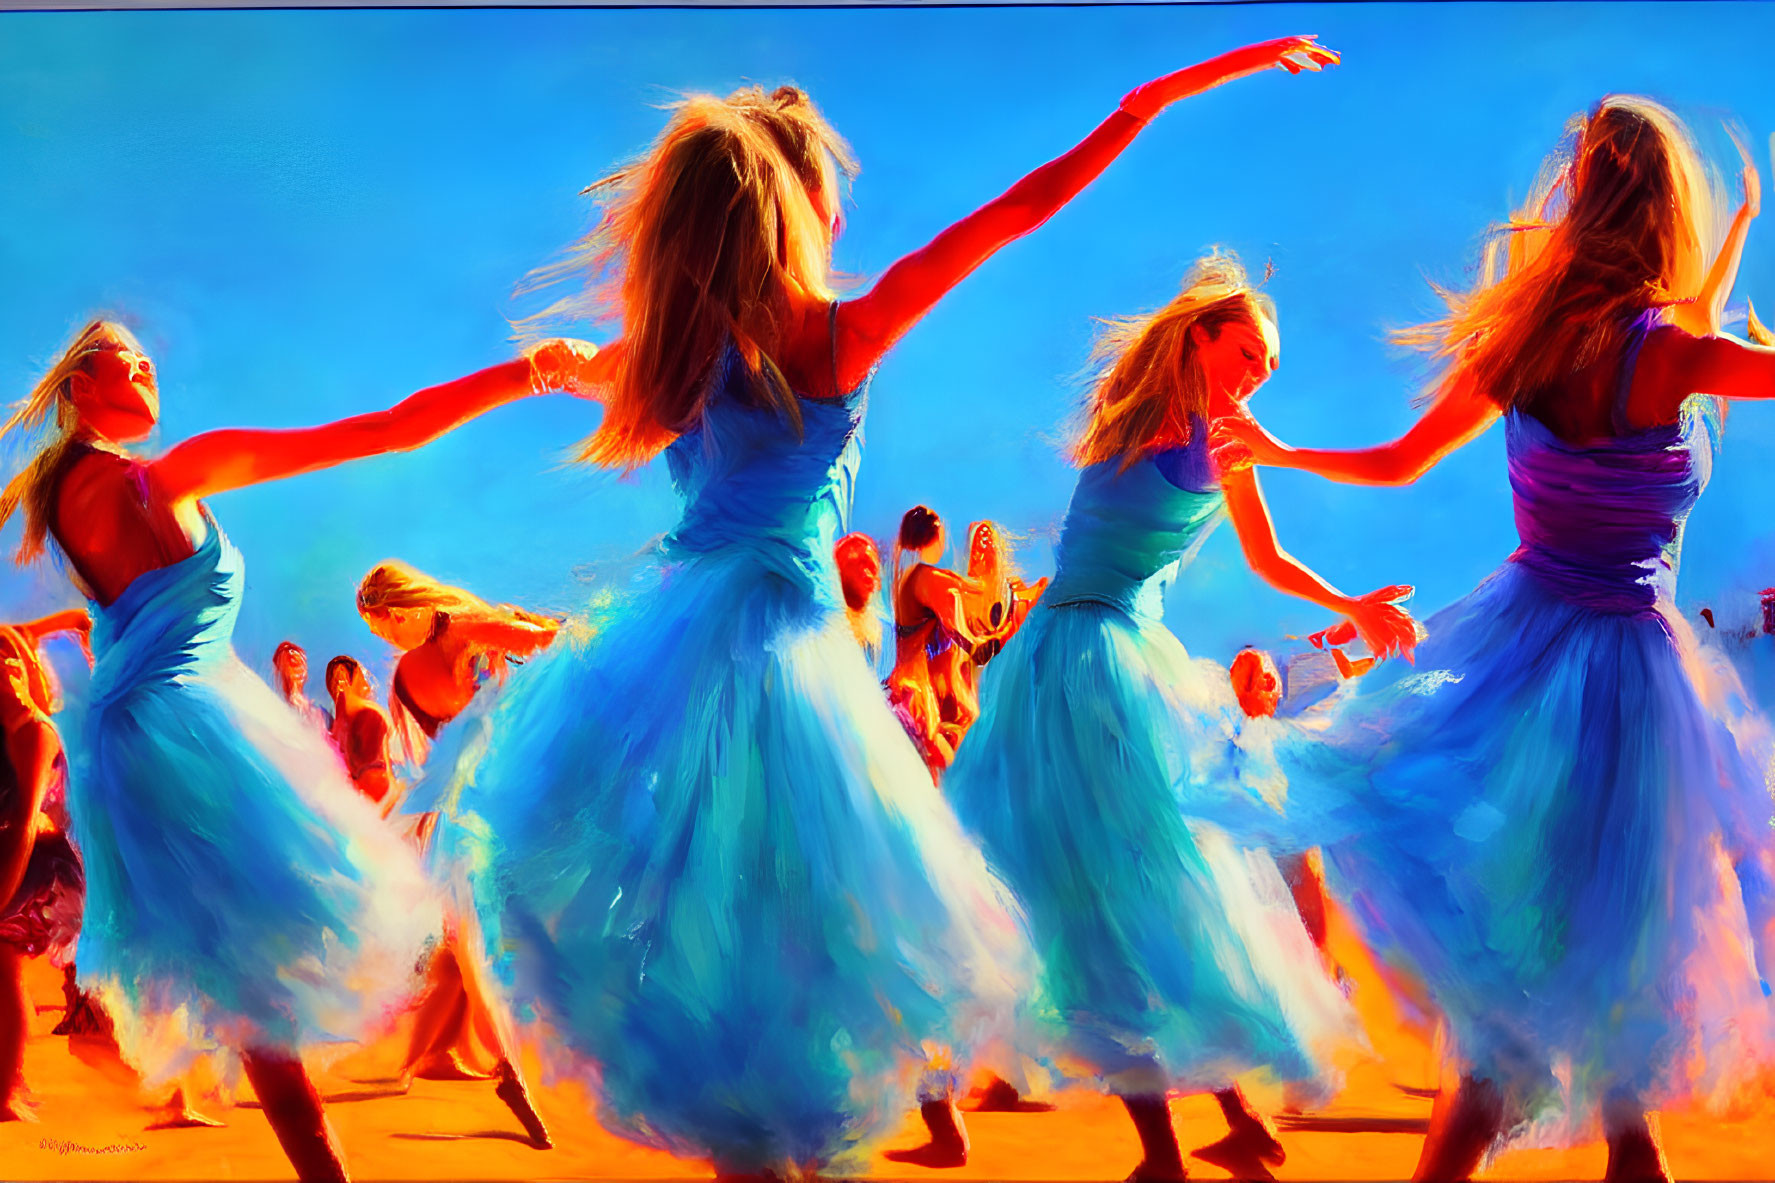 Colorful painting of women dancing in blue dresses with expressive brushstrokes and warm background